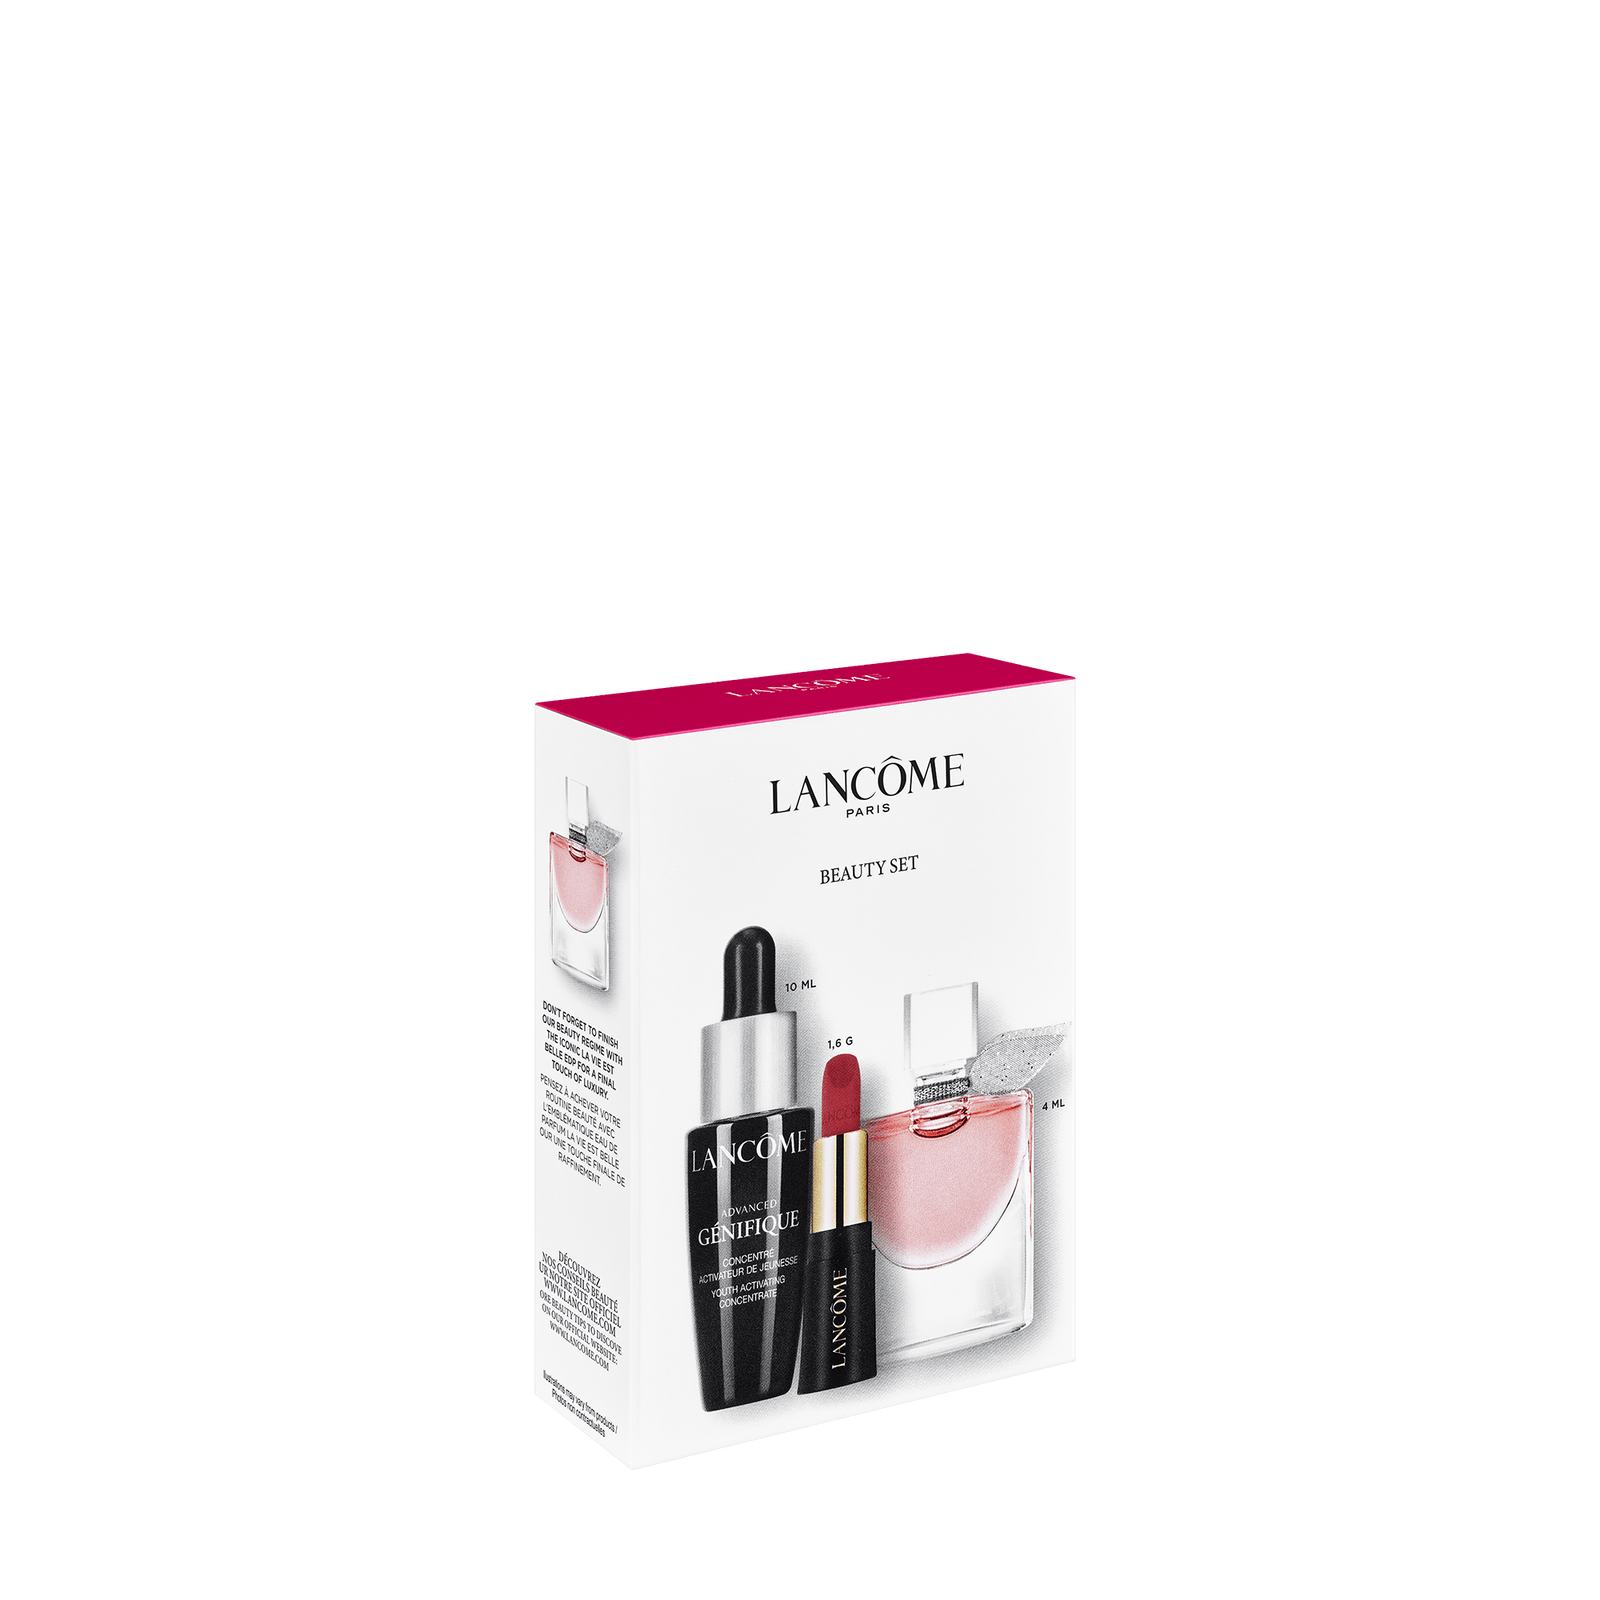 » Lancome Free Gift with Purchase (100% off)